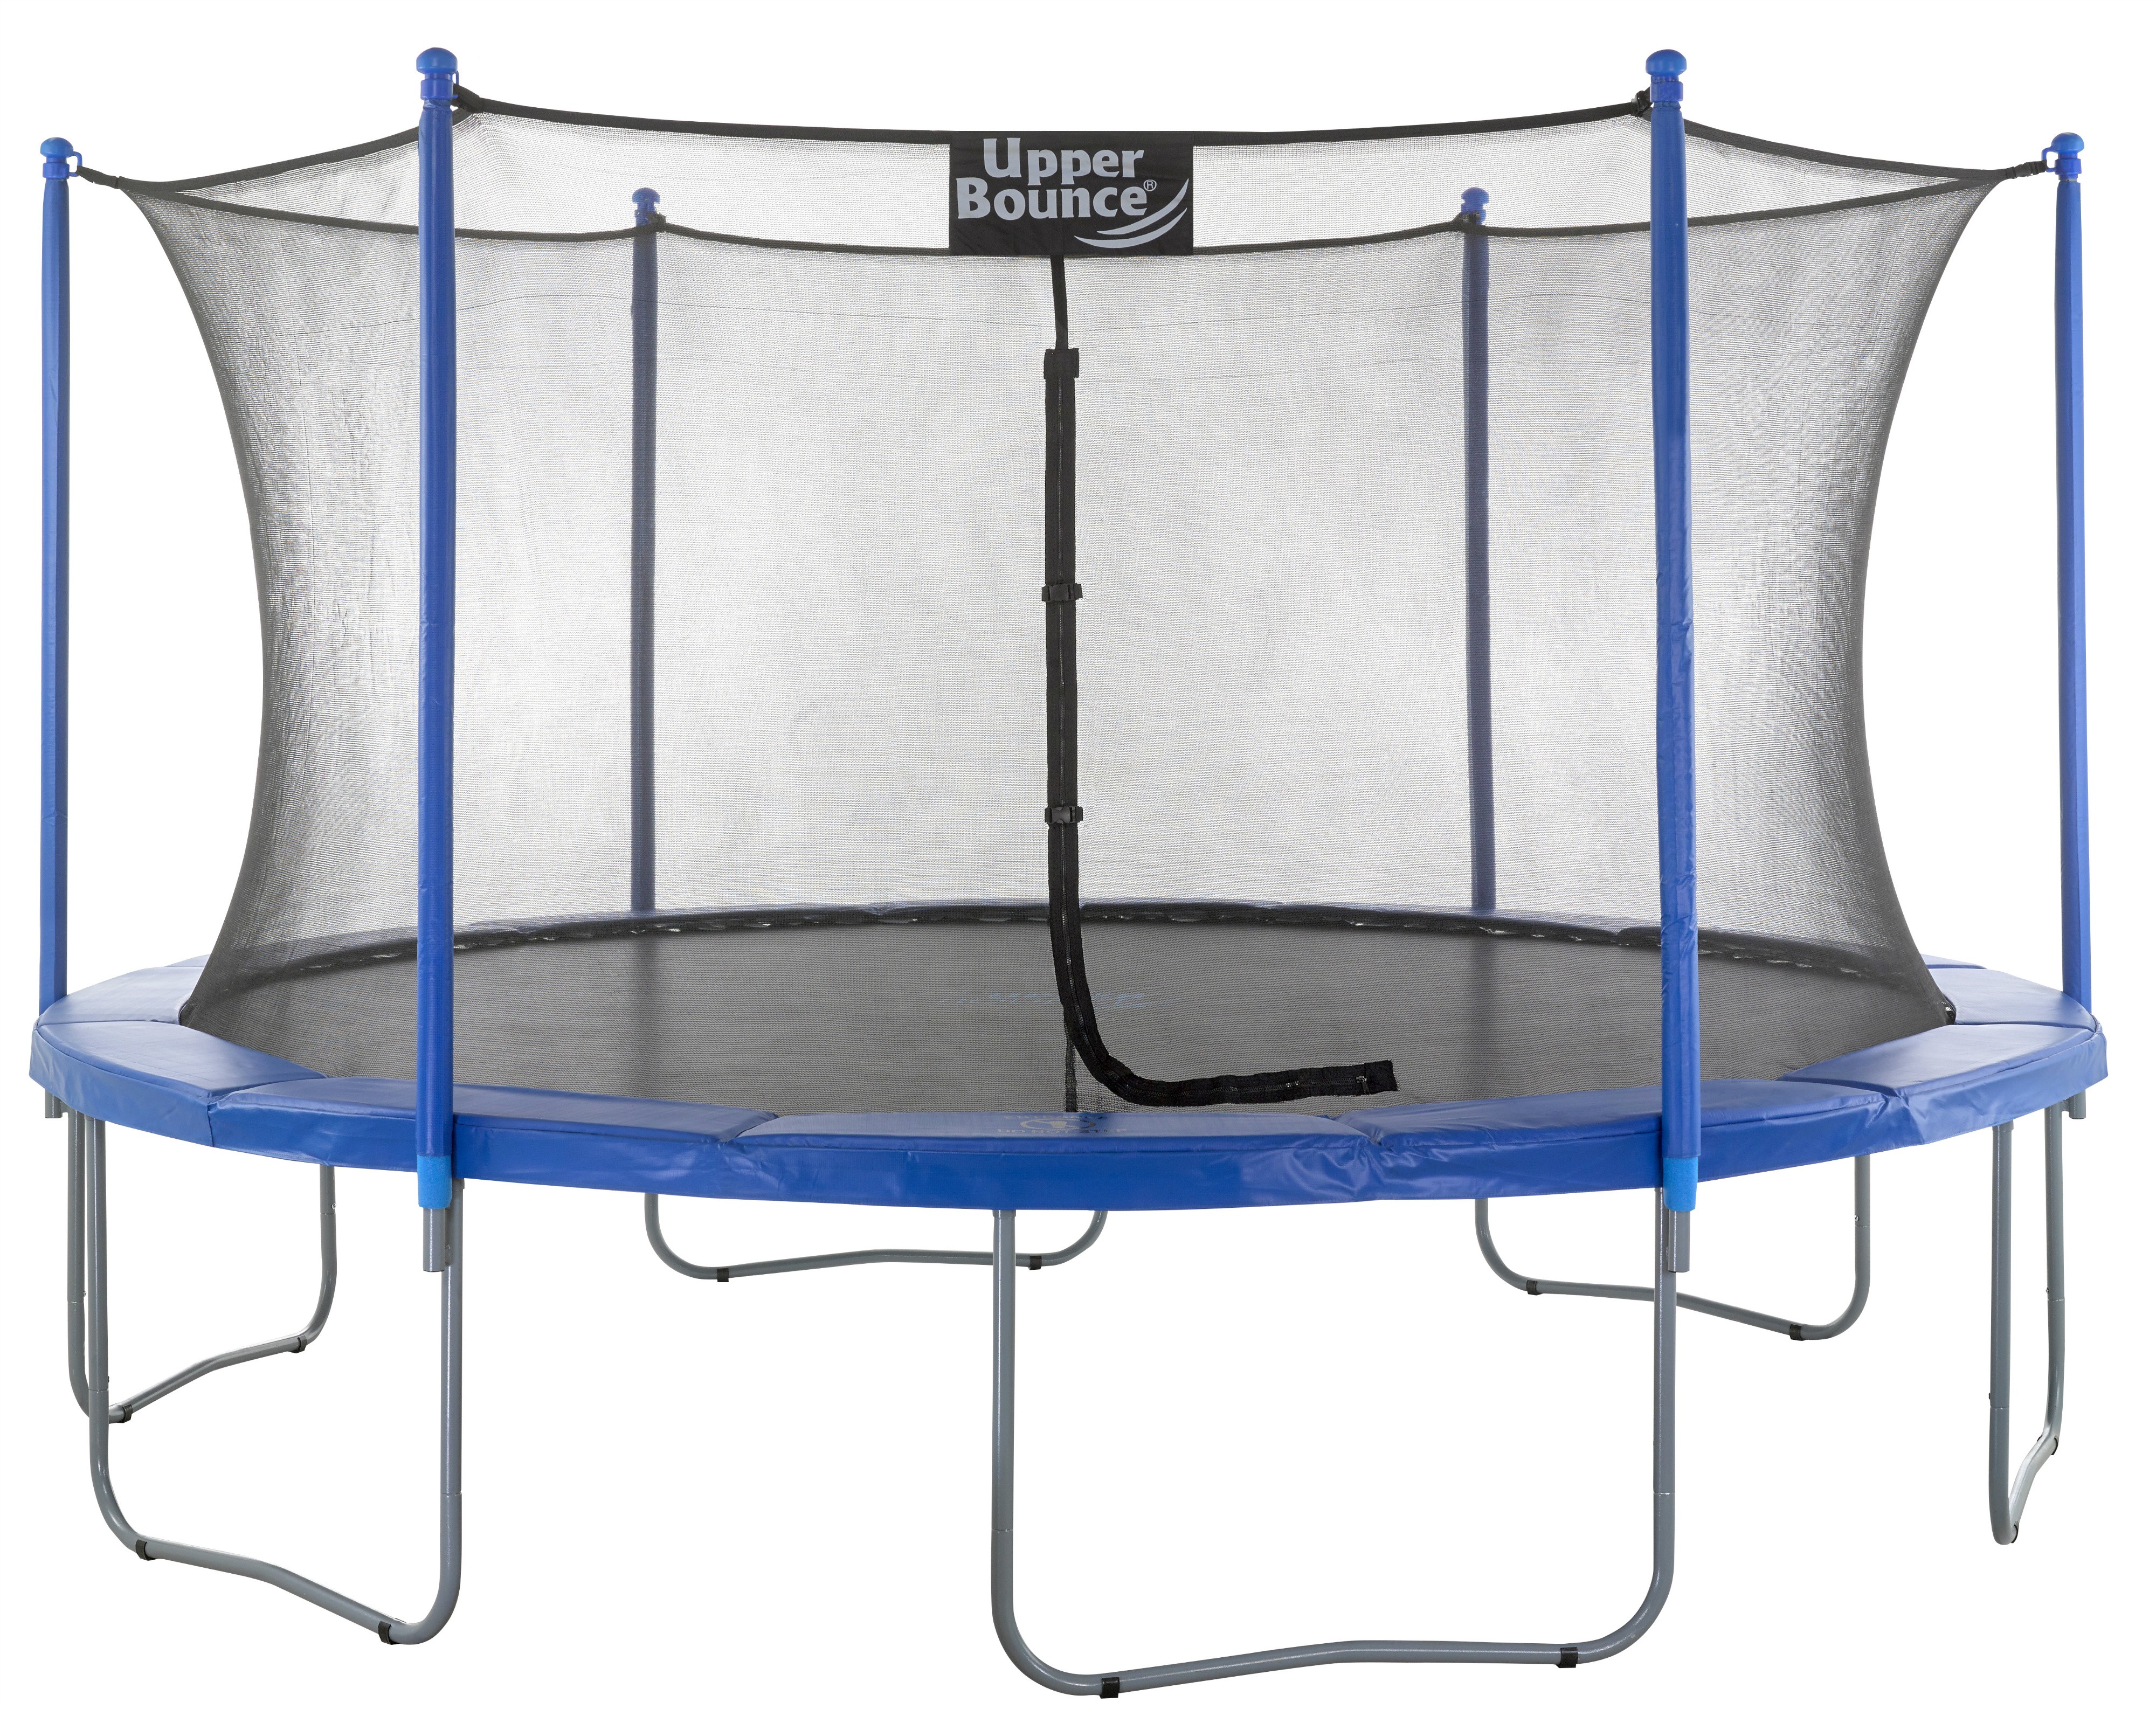 16Ft Large Trampoline and Enclosure Set | Garden & Outdoor Trampoline with Safety Net, Mat, Pad | Blue